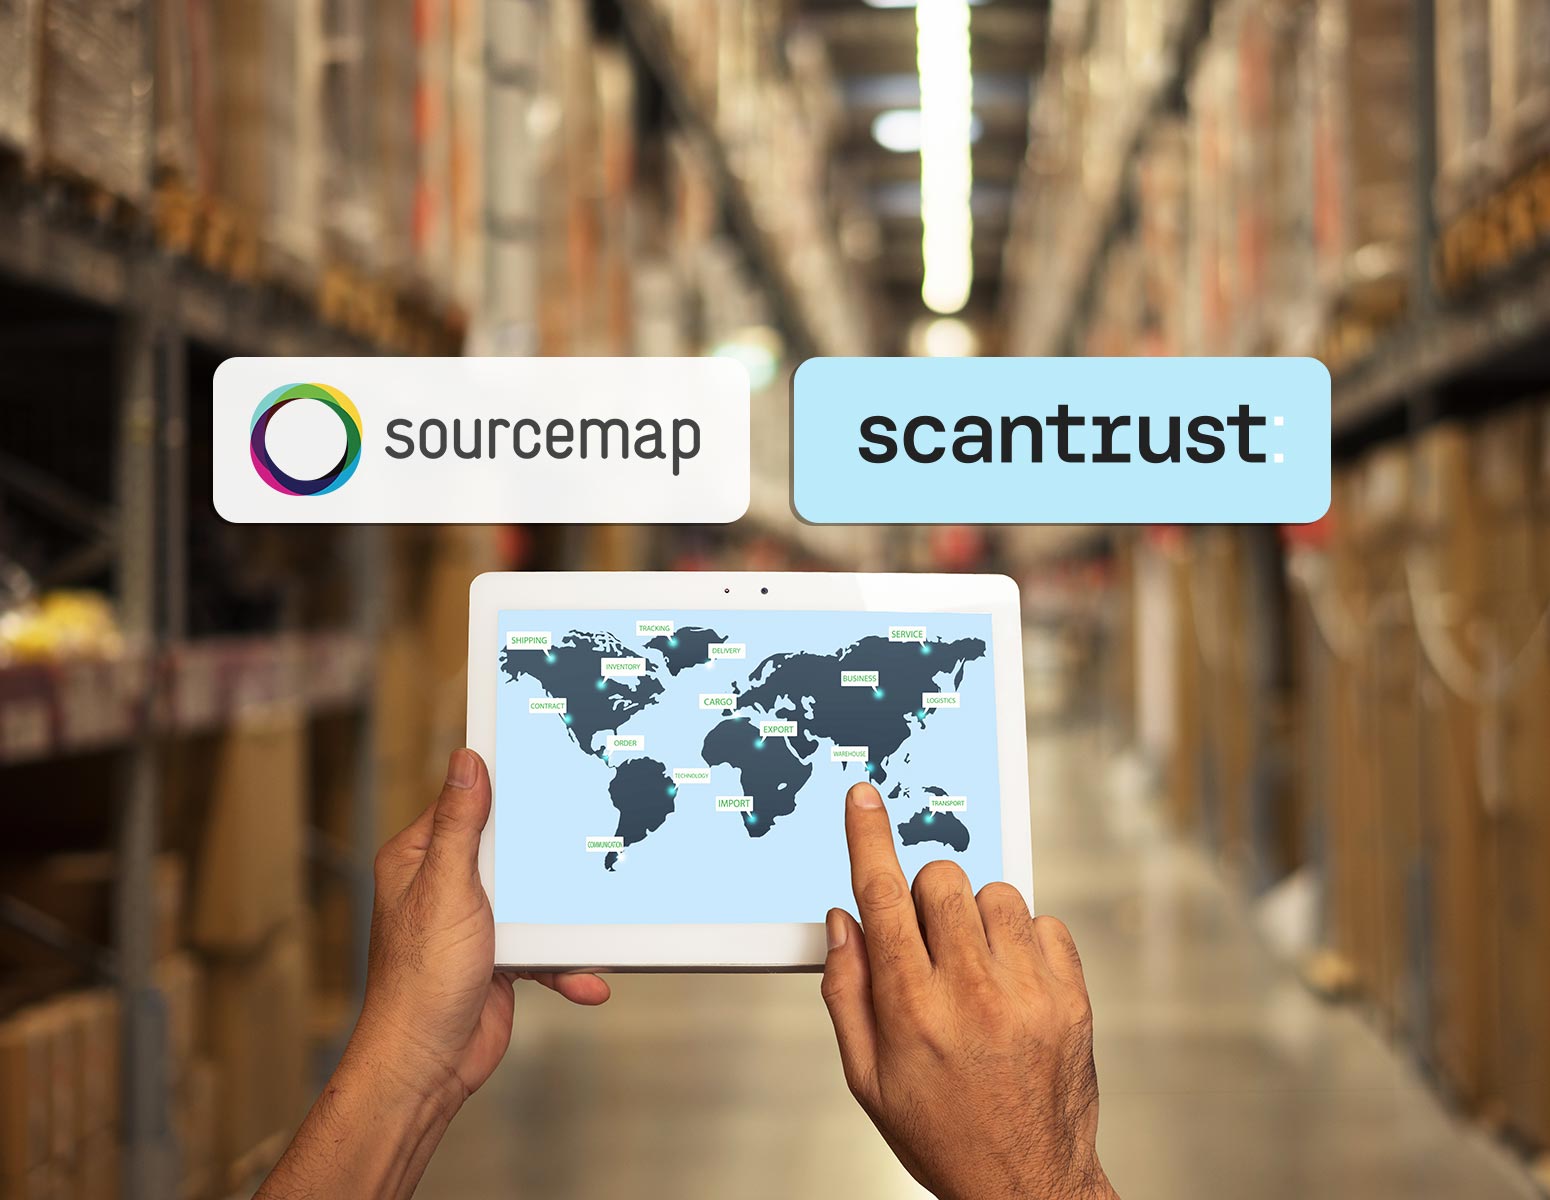 Sourcemap and Scantrust collaborate on digitalization